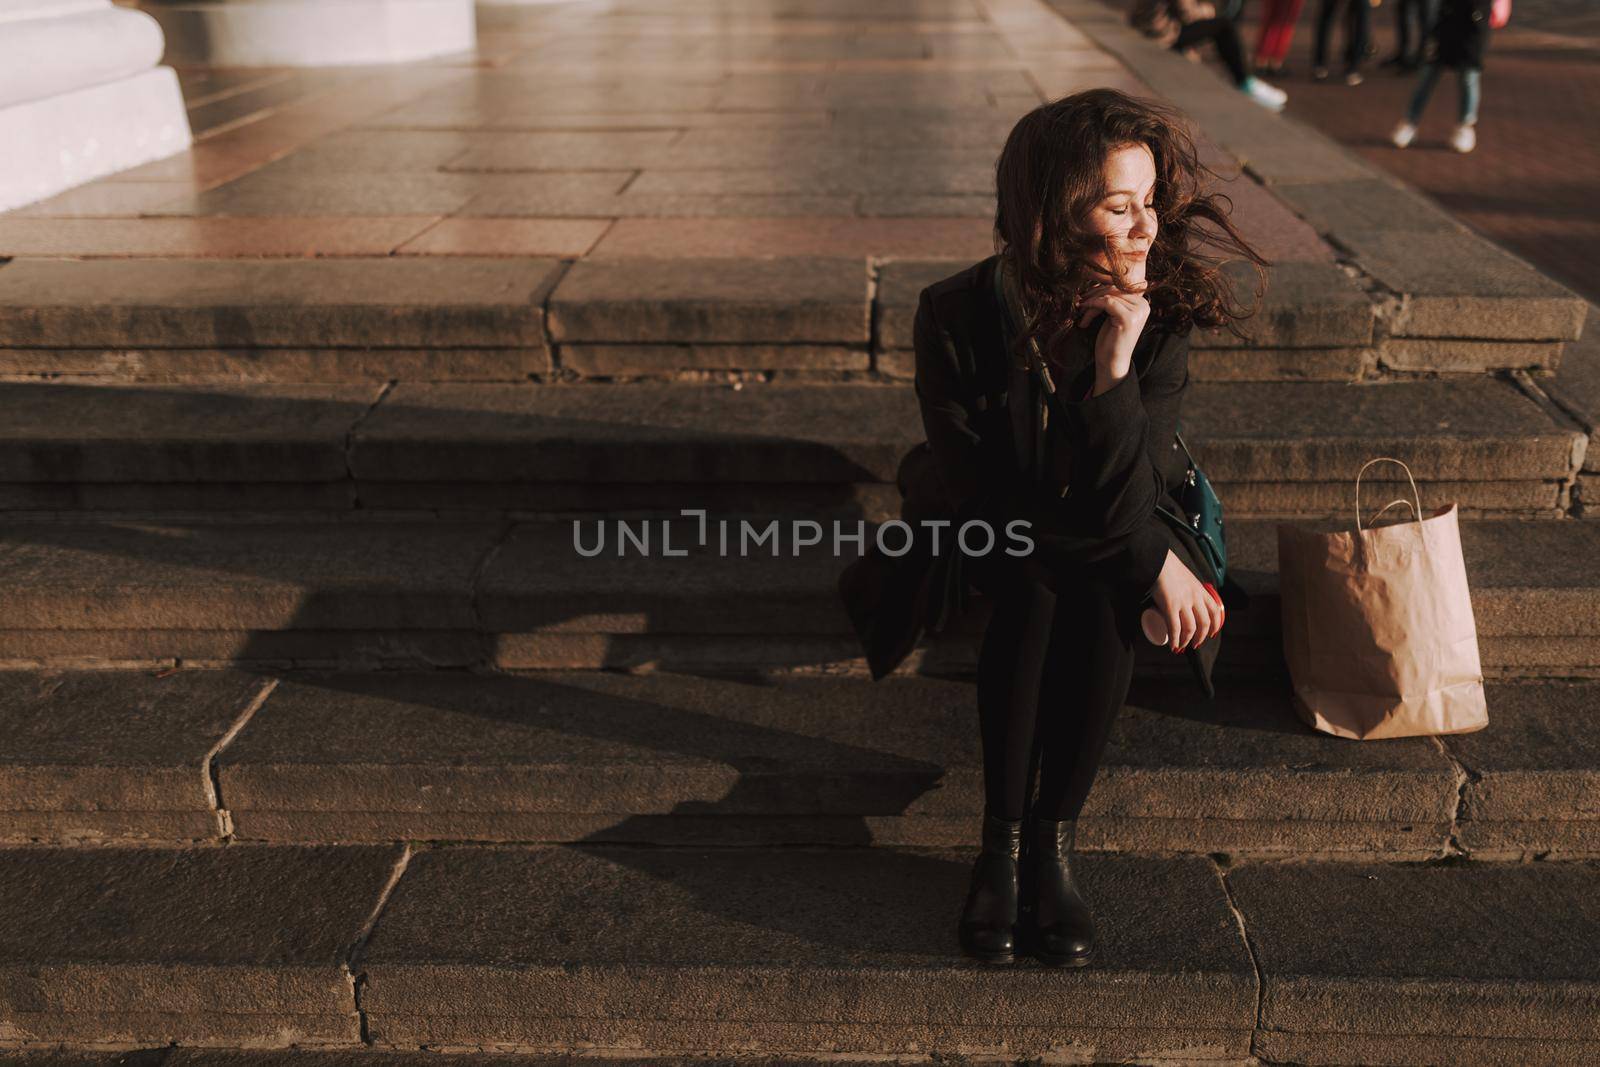 Pretty woman sitting on steps with hot drink and shopping bag next to her outdoors